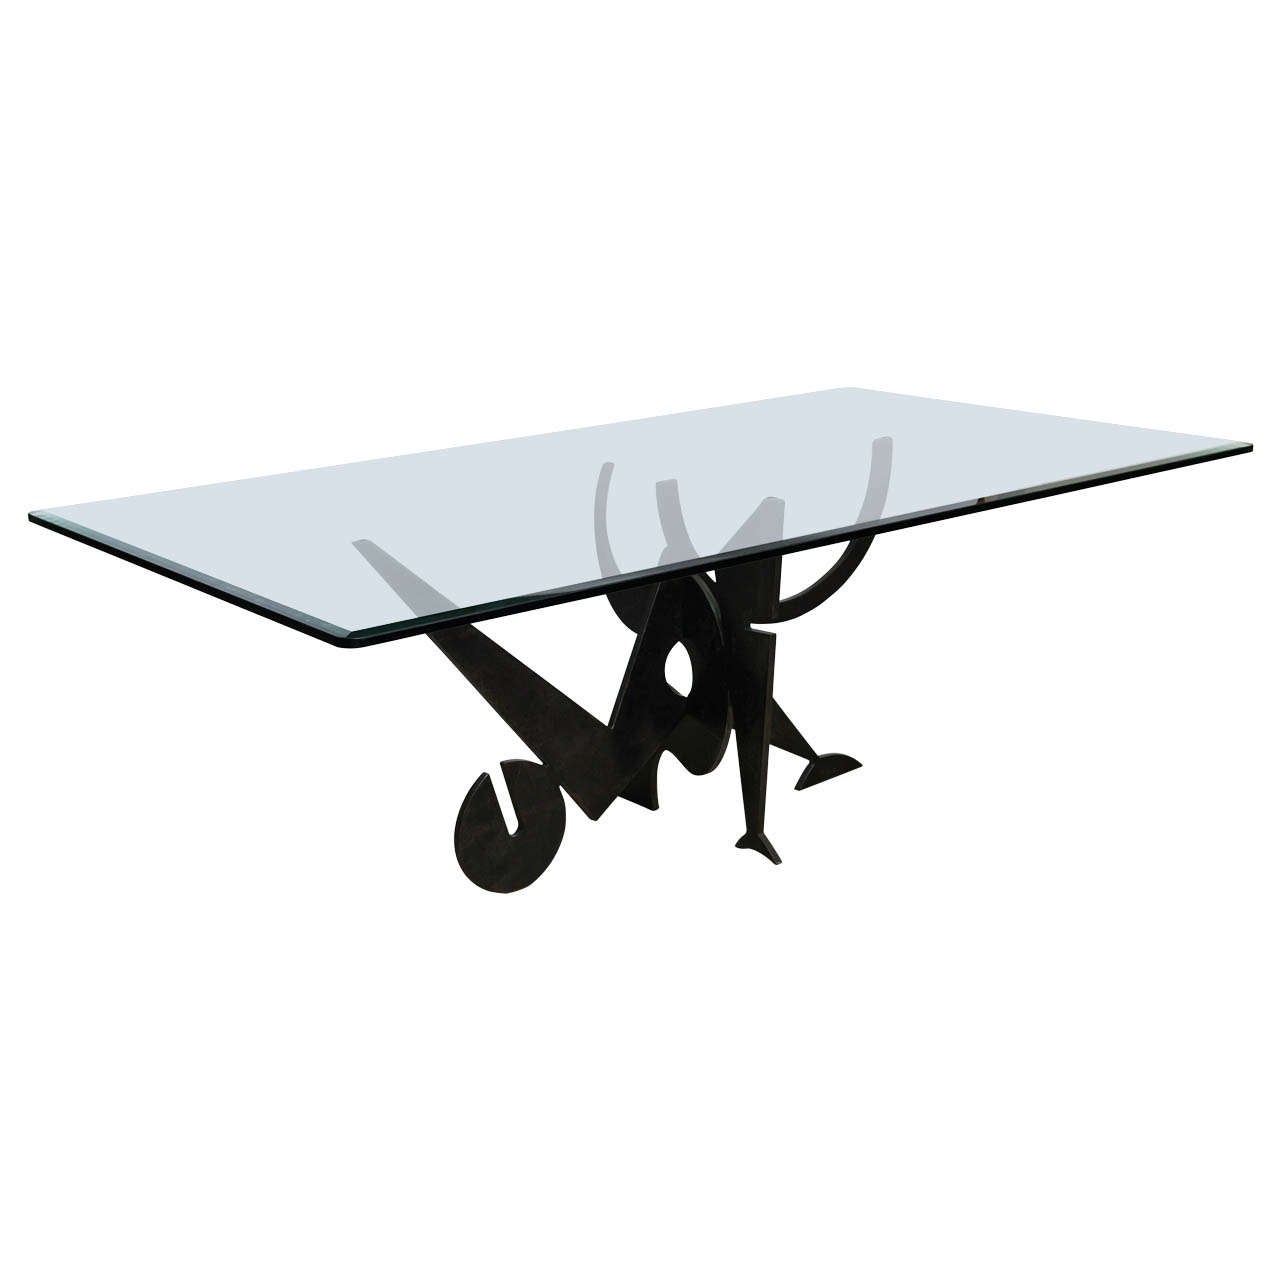 Italian Modern Patinated Bronze Dining Table, Pucci Di Rossi